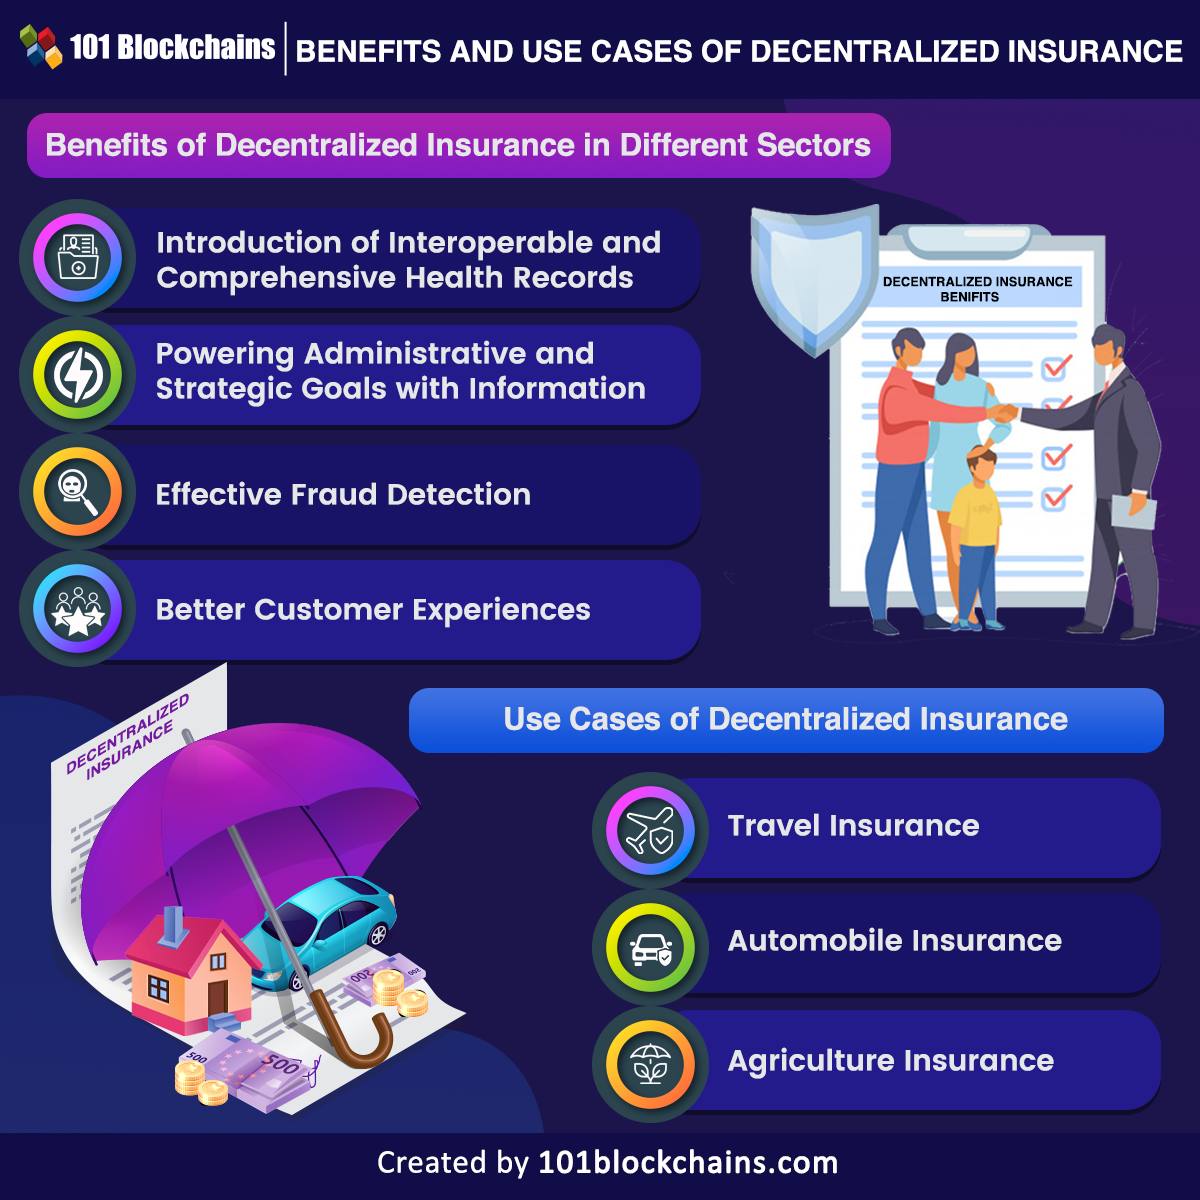 Benefits and Use Cases of Decentralized Insurance